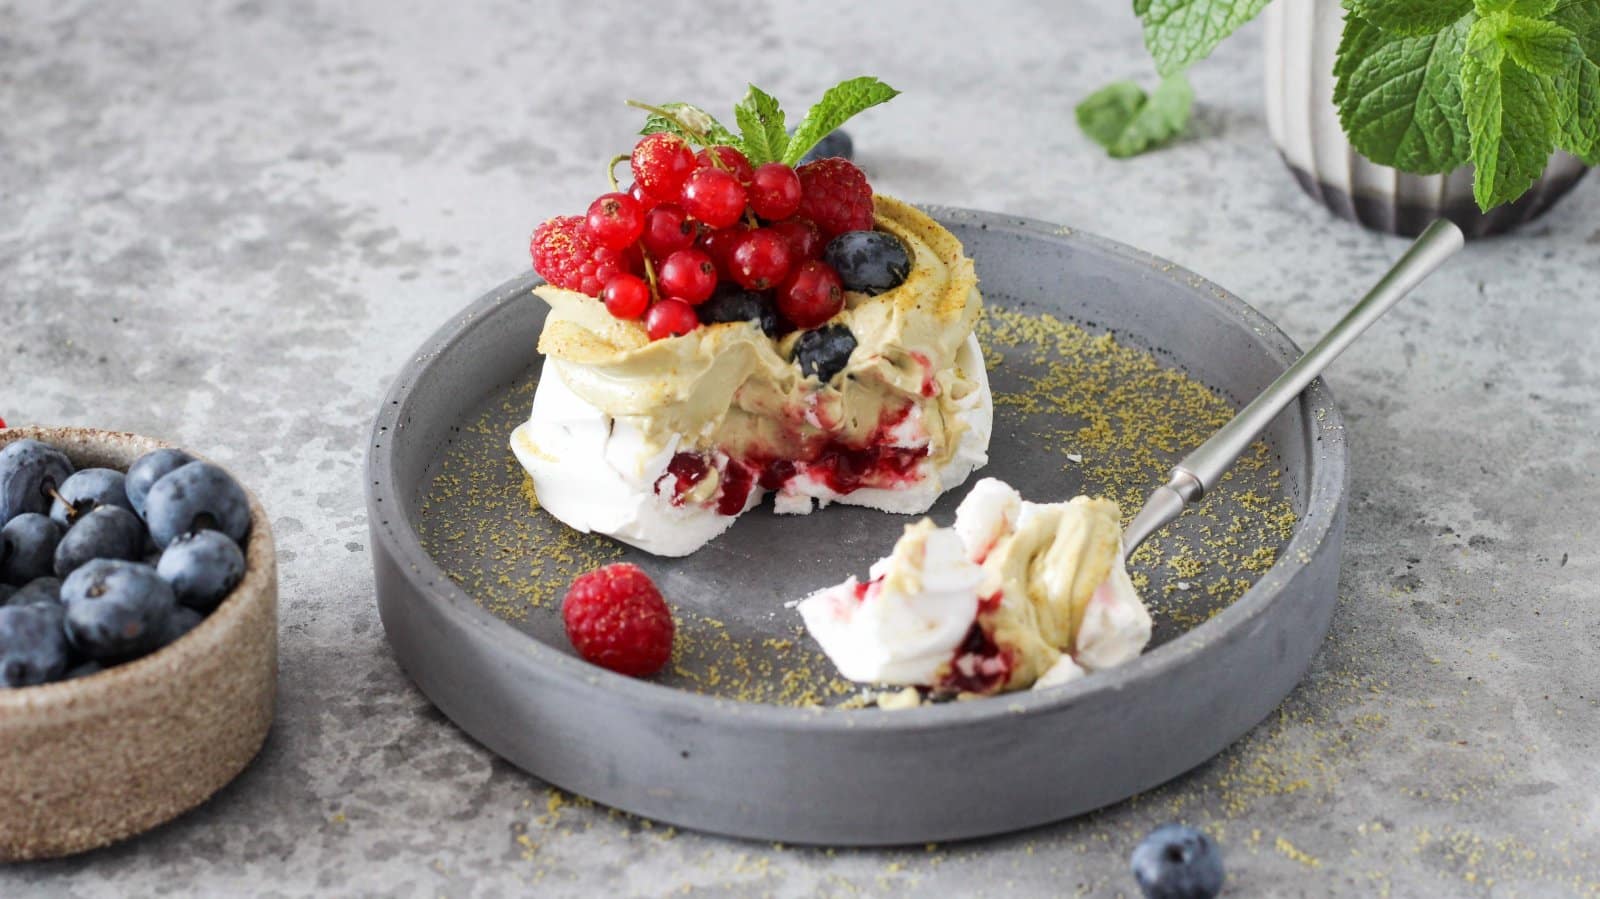 Image Credit: Shutterstock / Luba Kuzmicheva <p><span>Crisp meringue outside, soft marshmallow inside, topped with fresh fruit and cream, Pavlova is a dessert that’s as beautiful as it is delicious.</span></p>